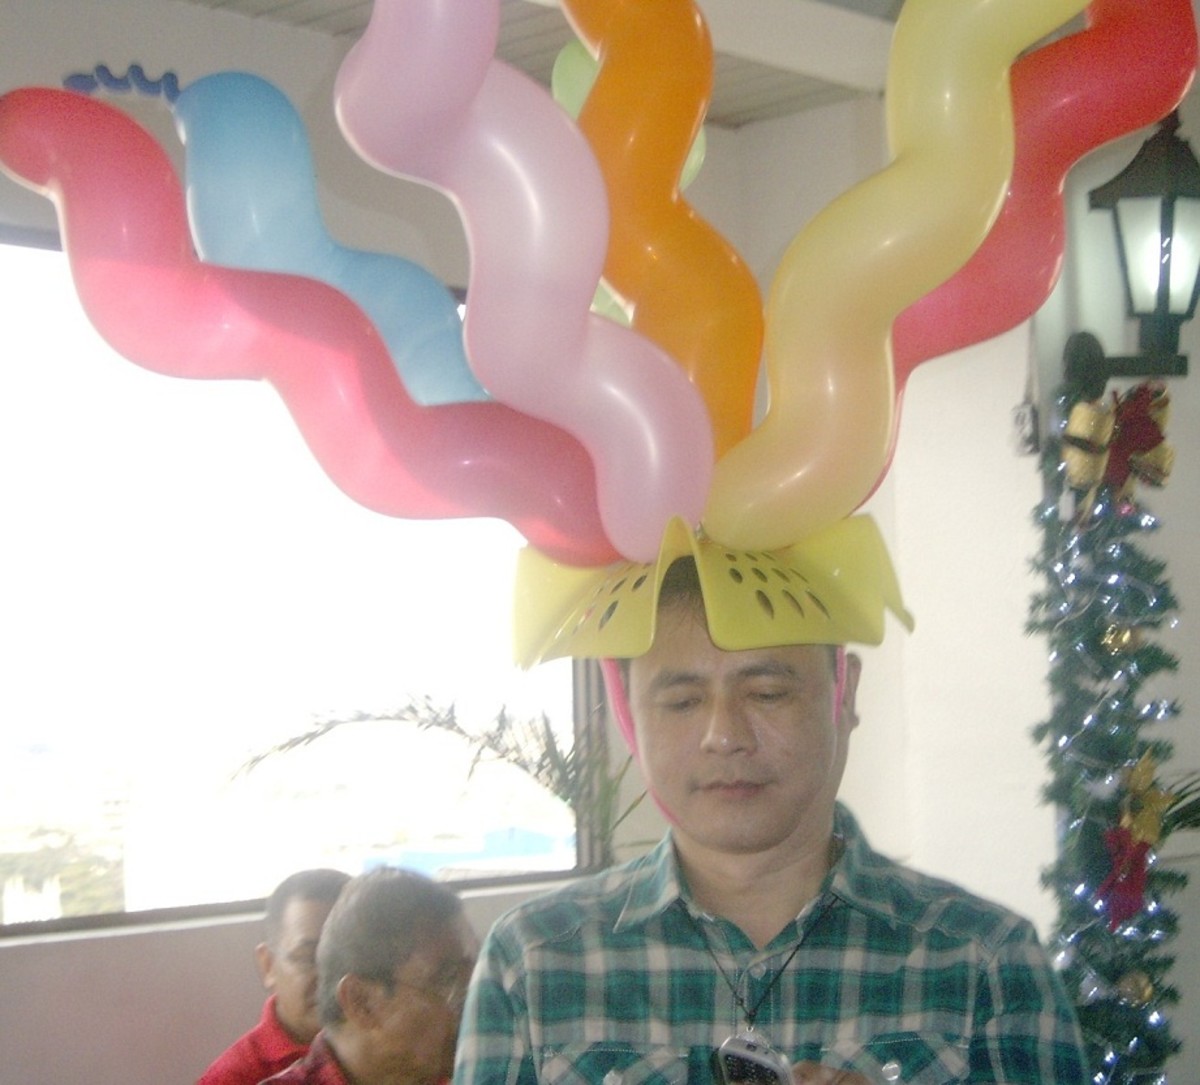 crazy-hats-see-to-many-of-them-in-a-christmas-party